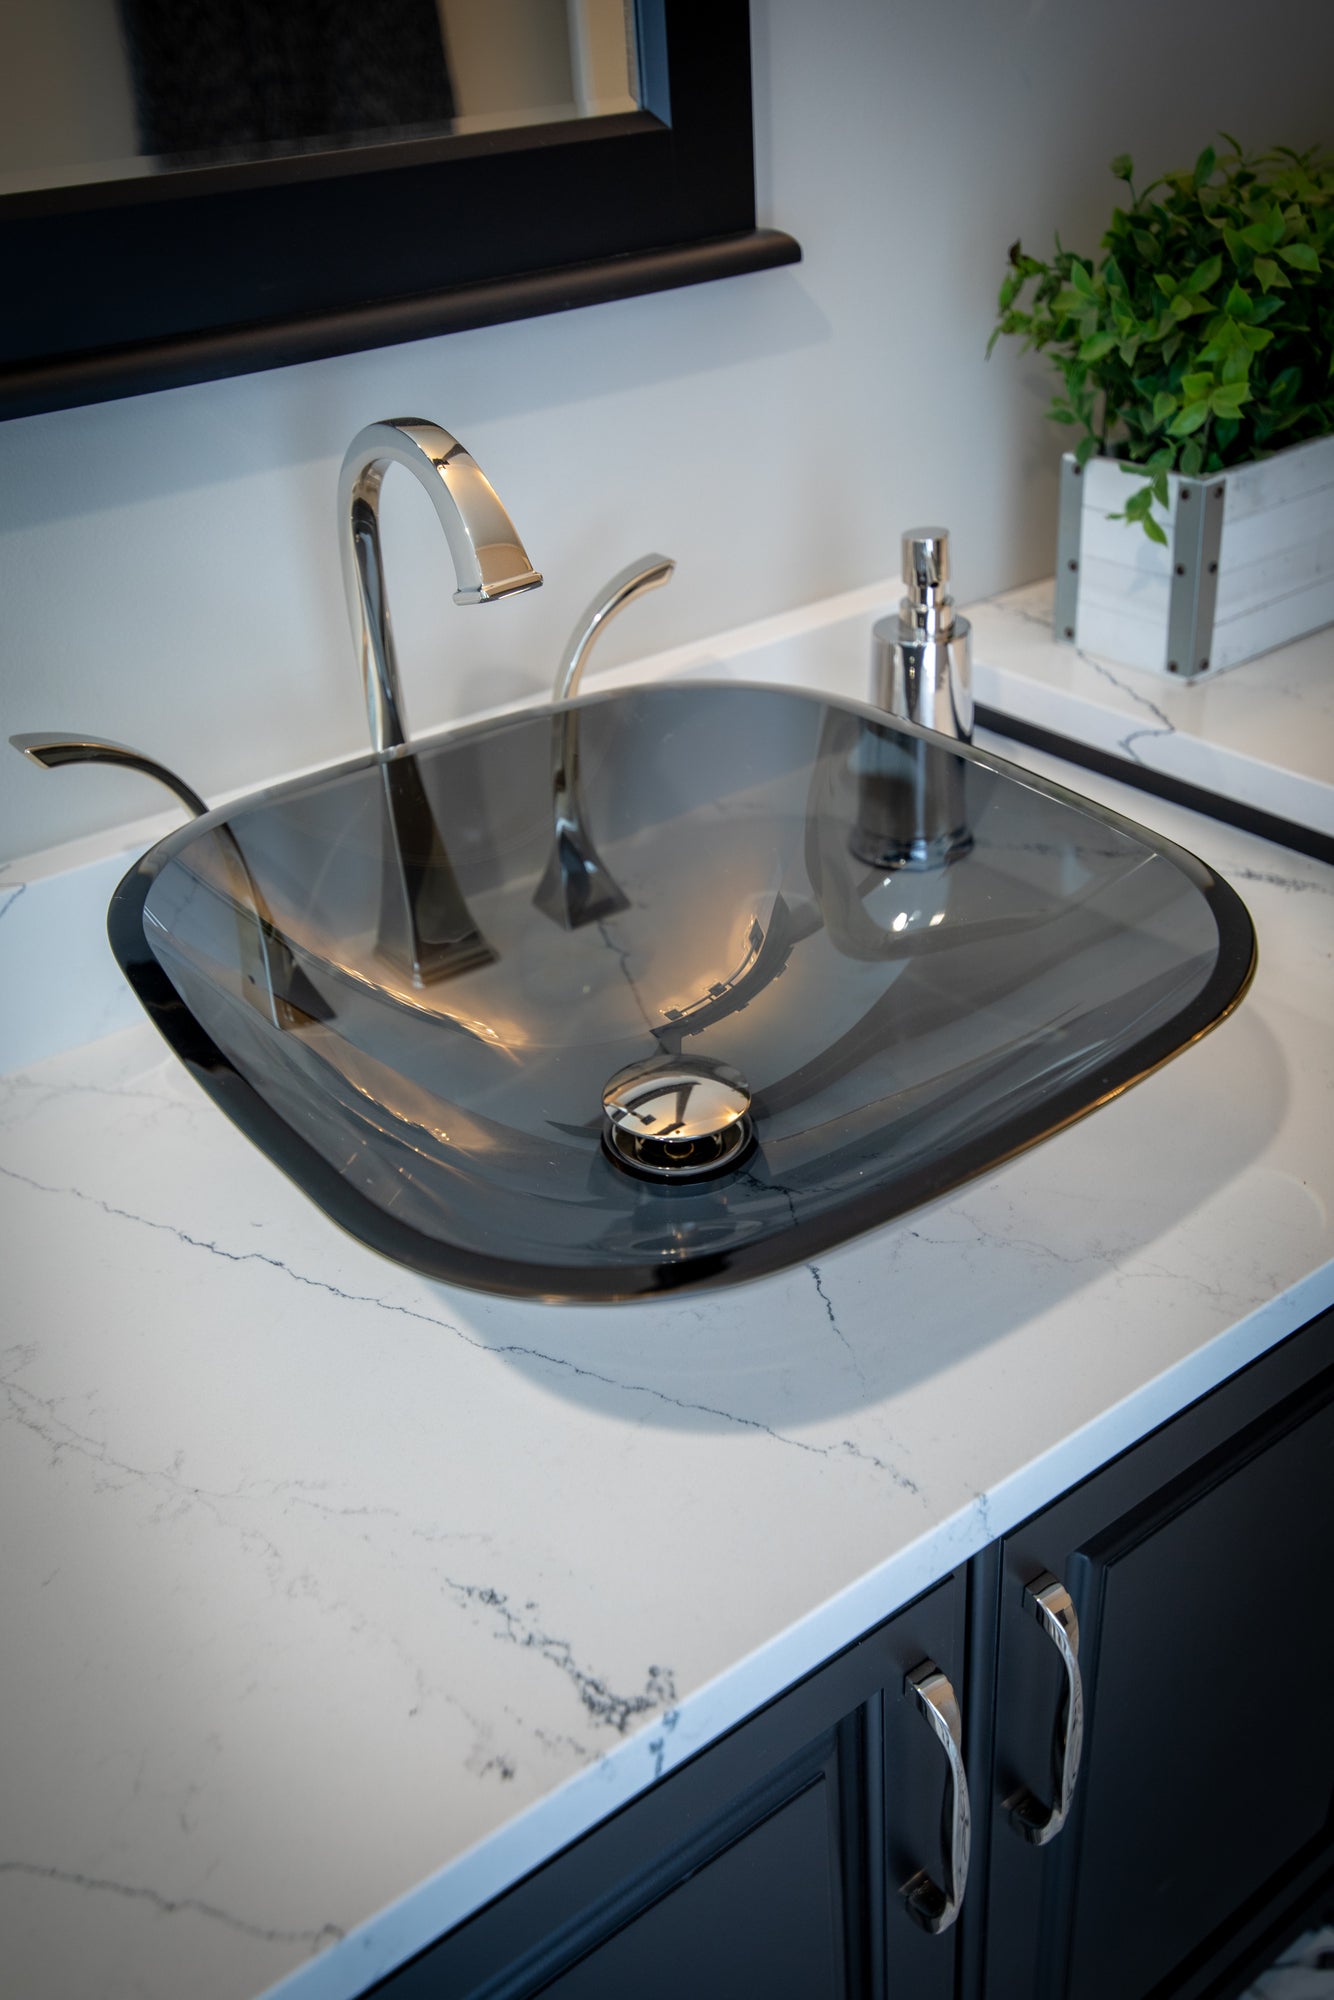 Eden Bath Square Glass Vessel Sink in Onyx Black with Rounded Corners